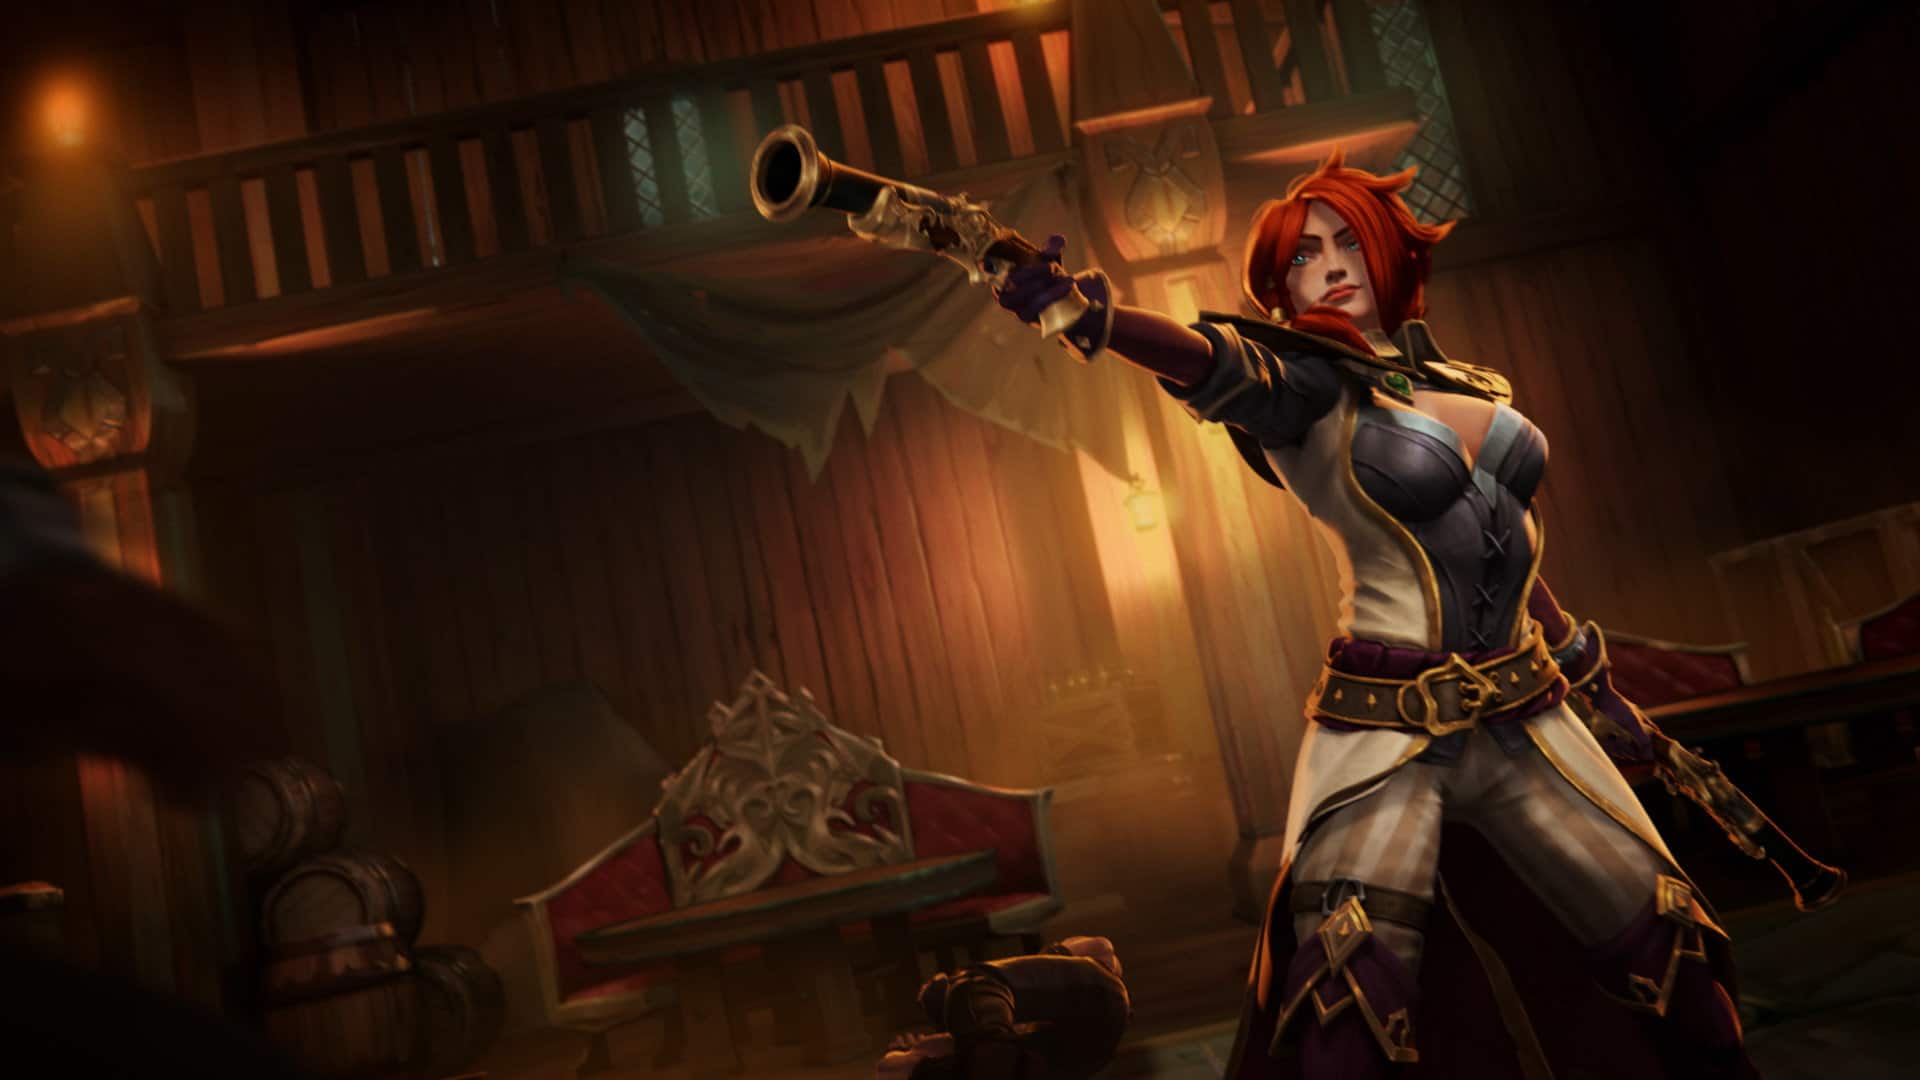 Ruined King: A League of Legends Story surprise launches on console and PC today